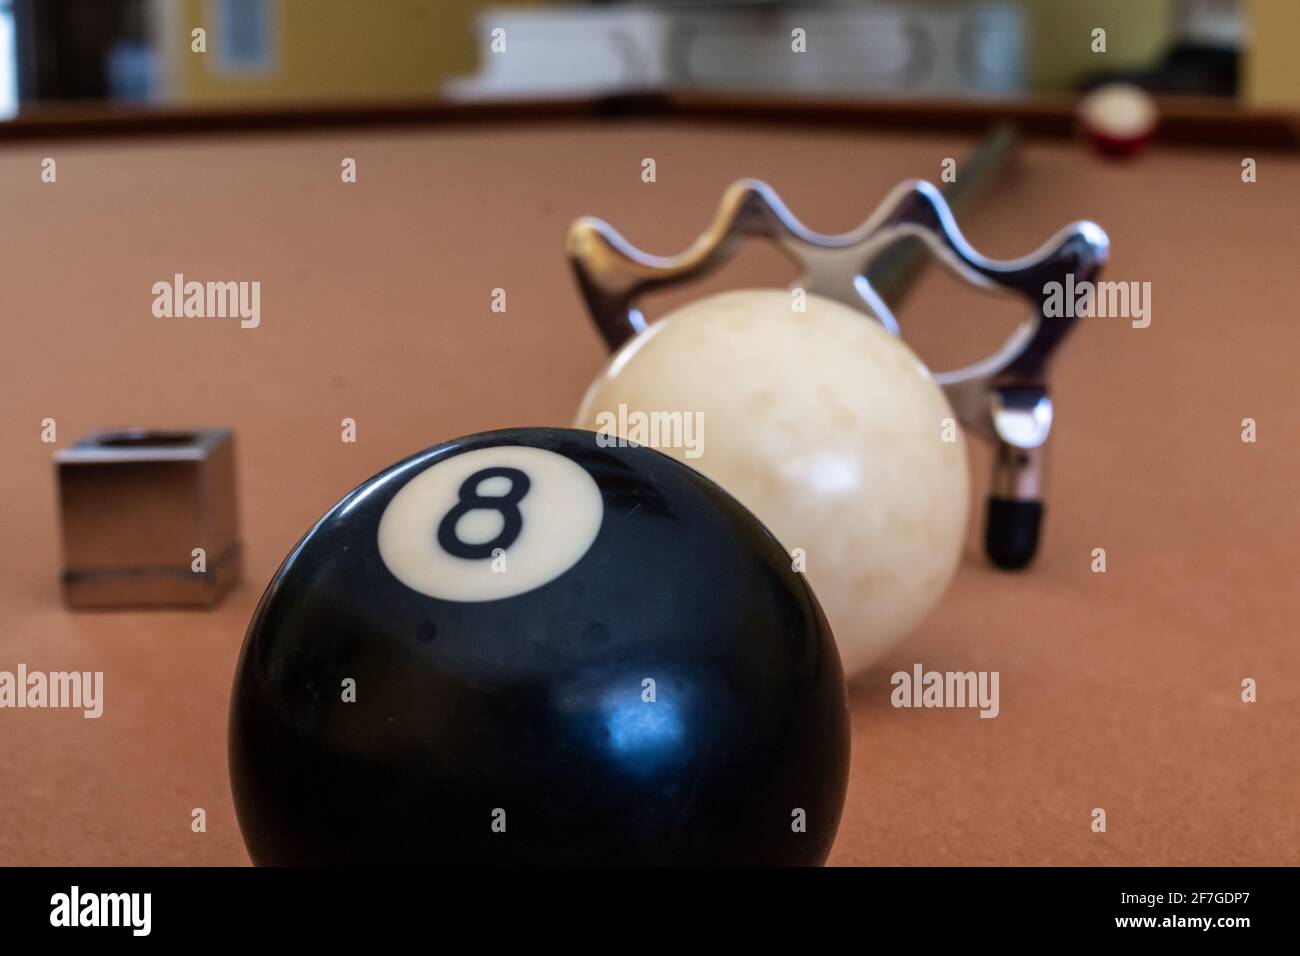 A billiards bridge aid, white ball, eight ball and cue chalk line up on a gold felt pool table, Toronto, Ontario Canada. Stock Photo